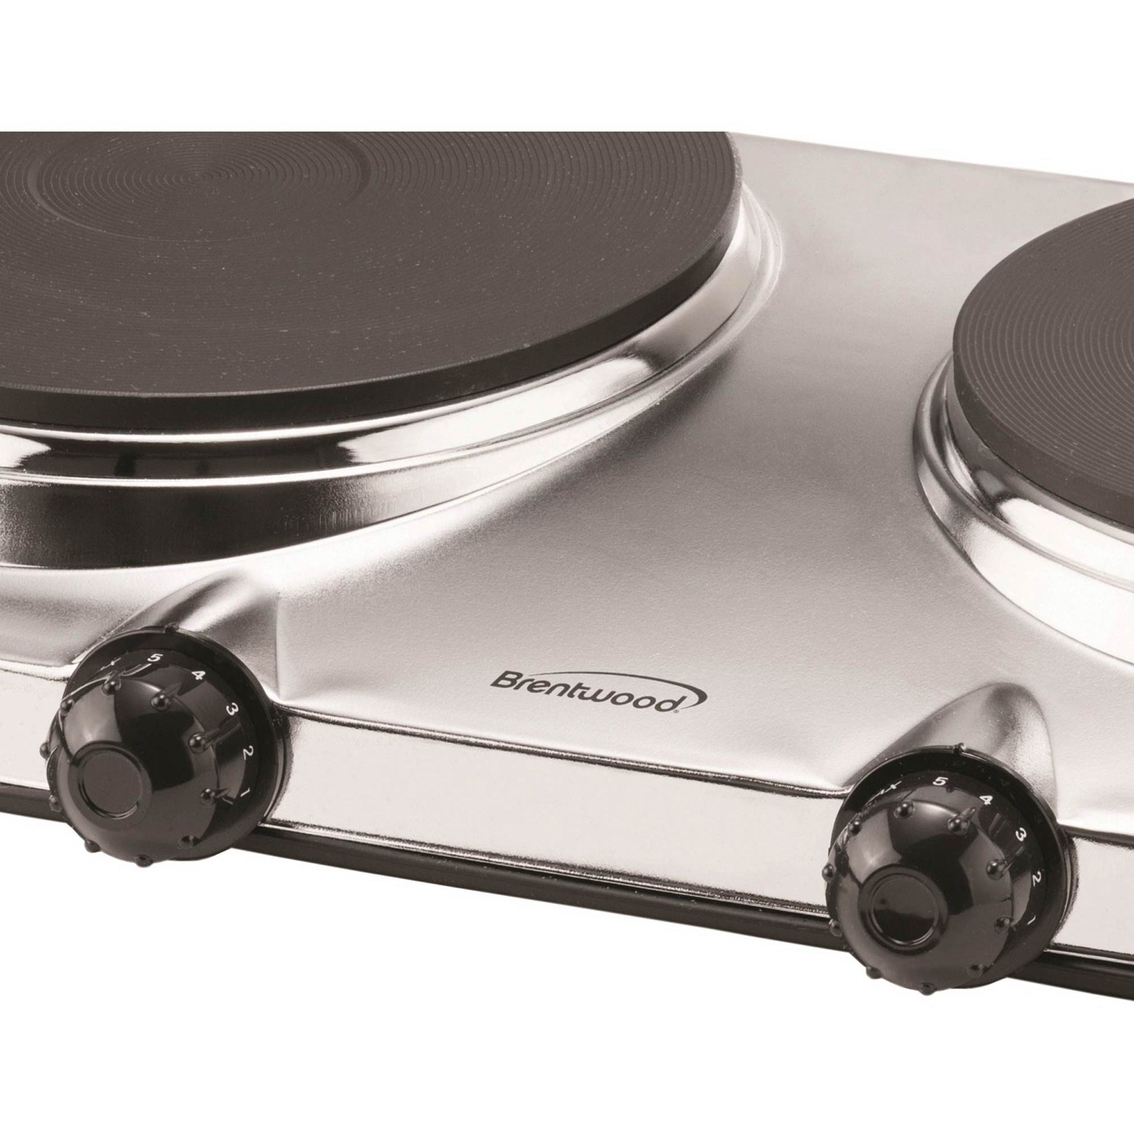 Brentwood 1440 Watt Double-Burner Electric Hot Plate - Image 4 of 5